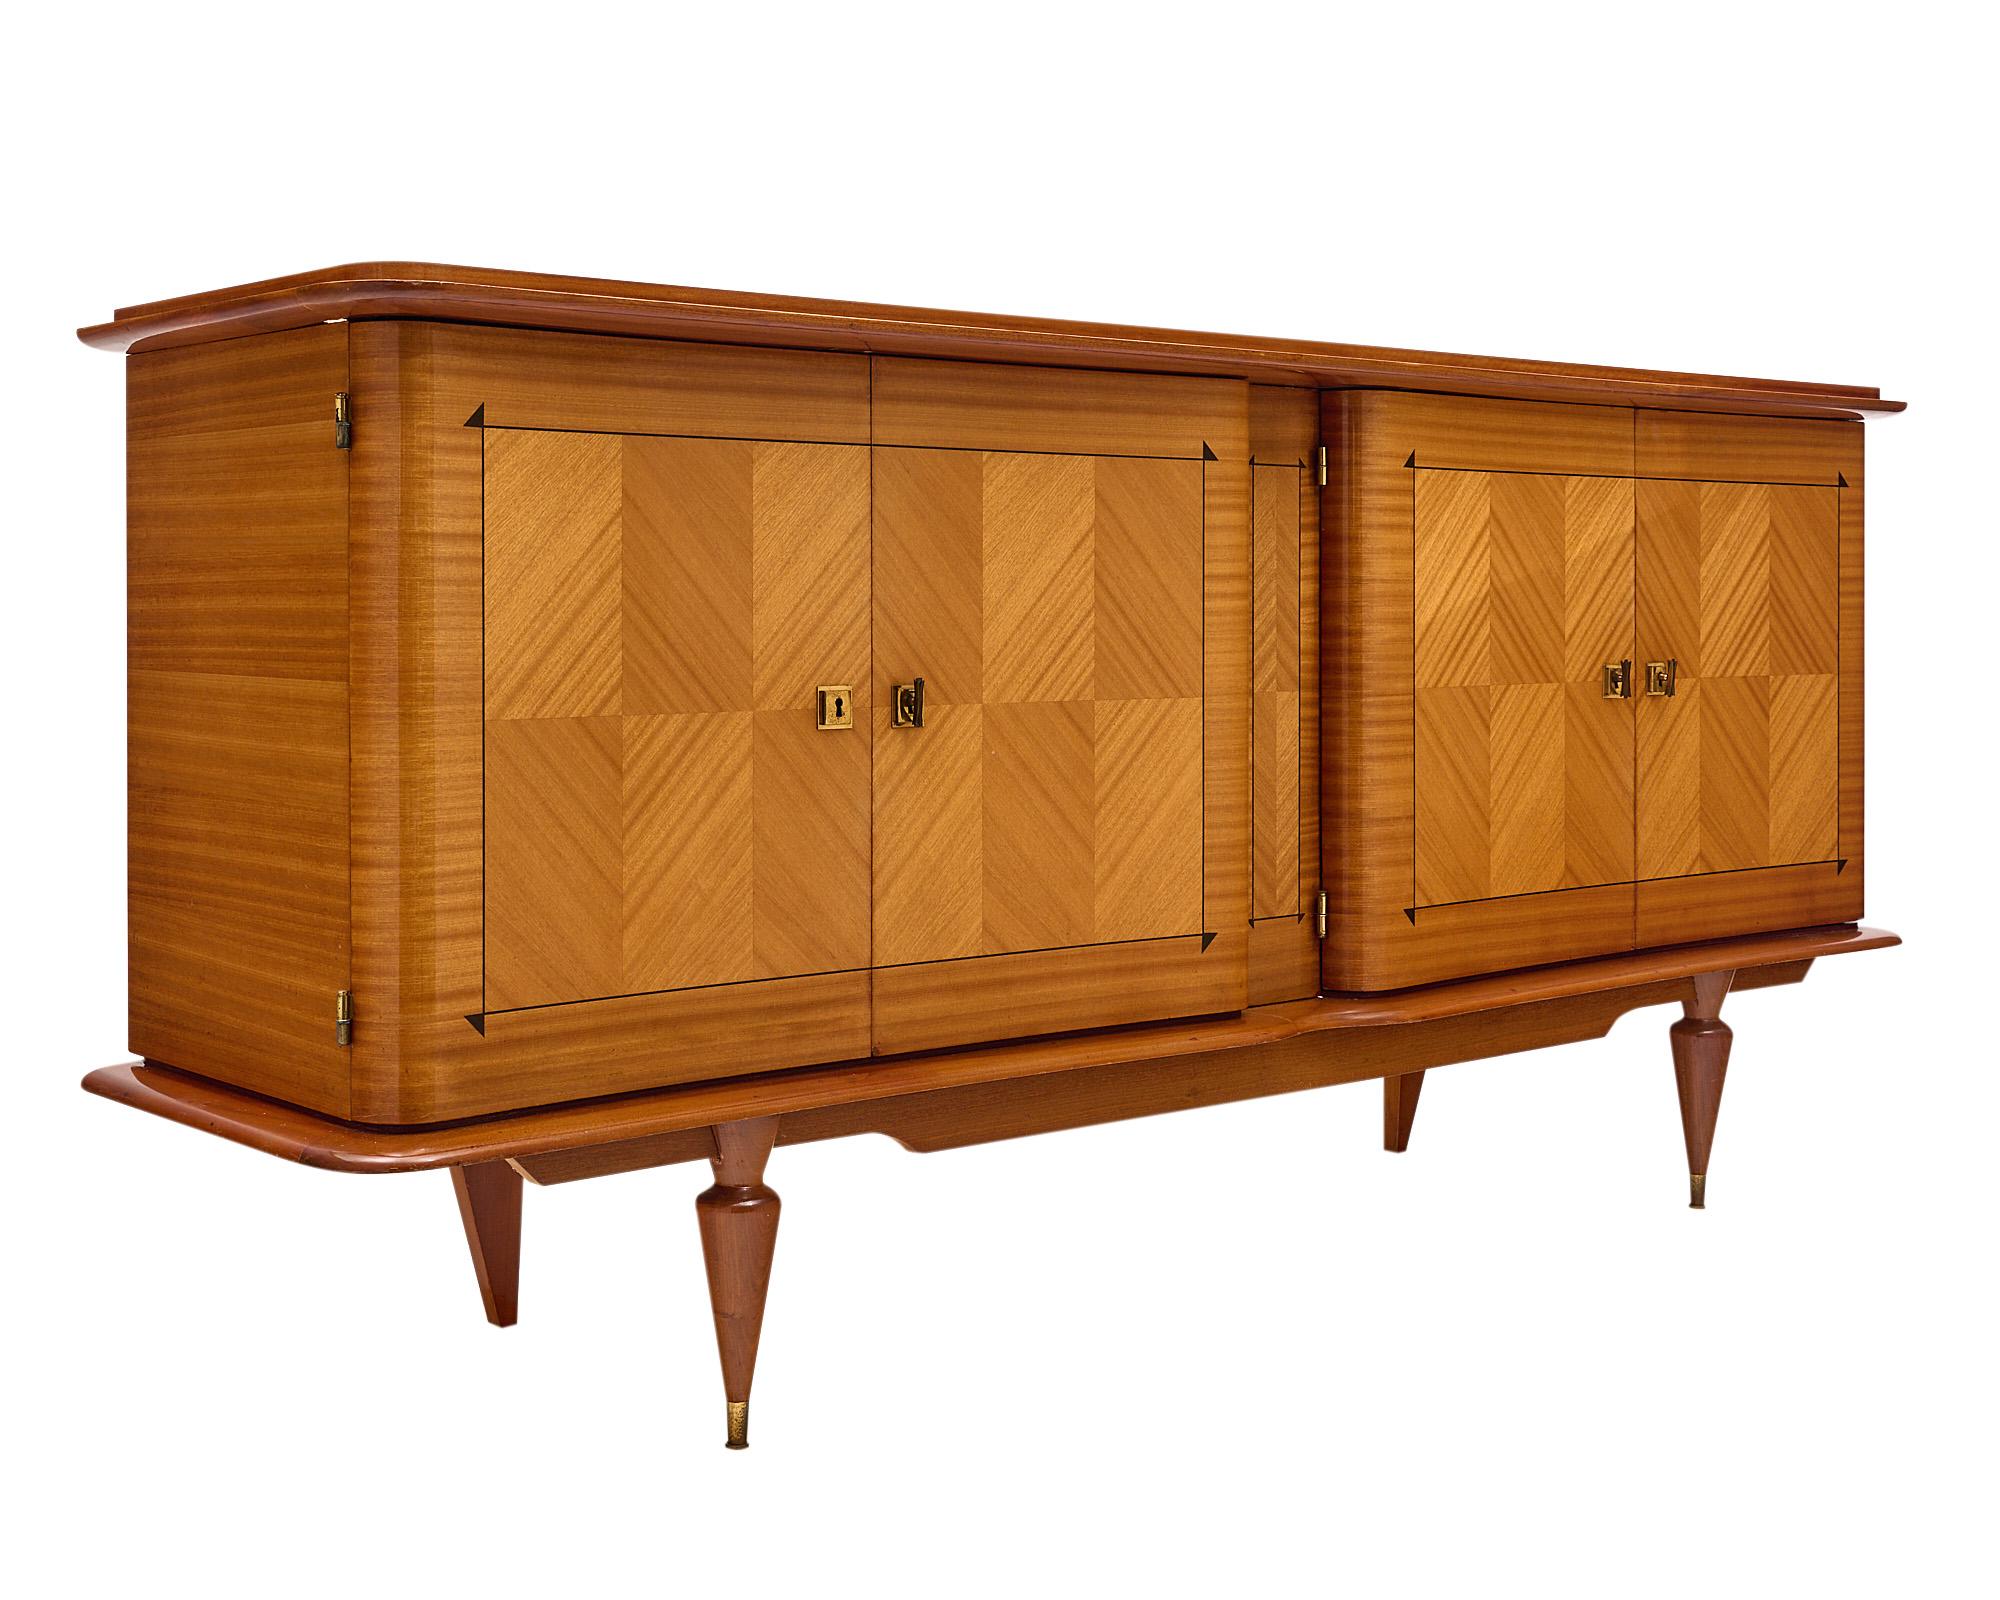 Buffet from France made with an impressive rosewood parquetry façade. The piece features four doors with working locks and keys that open to interior shelving. The high-shine finish and lovely curved lines give this buffet a beautiful decorative